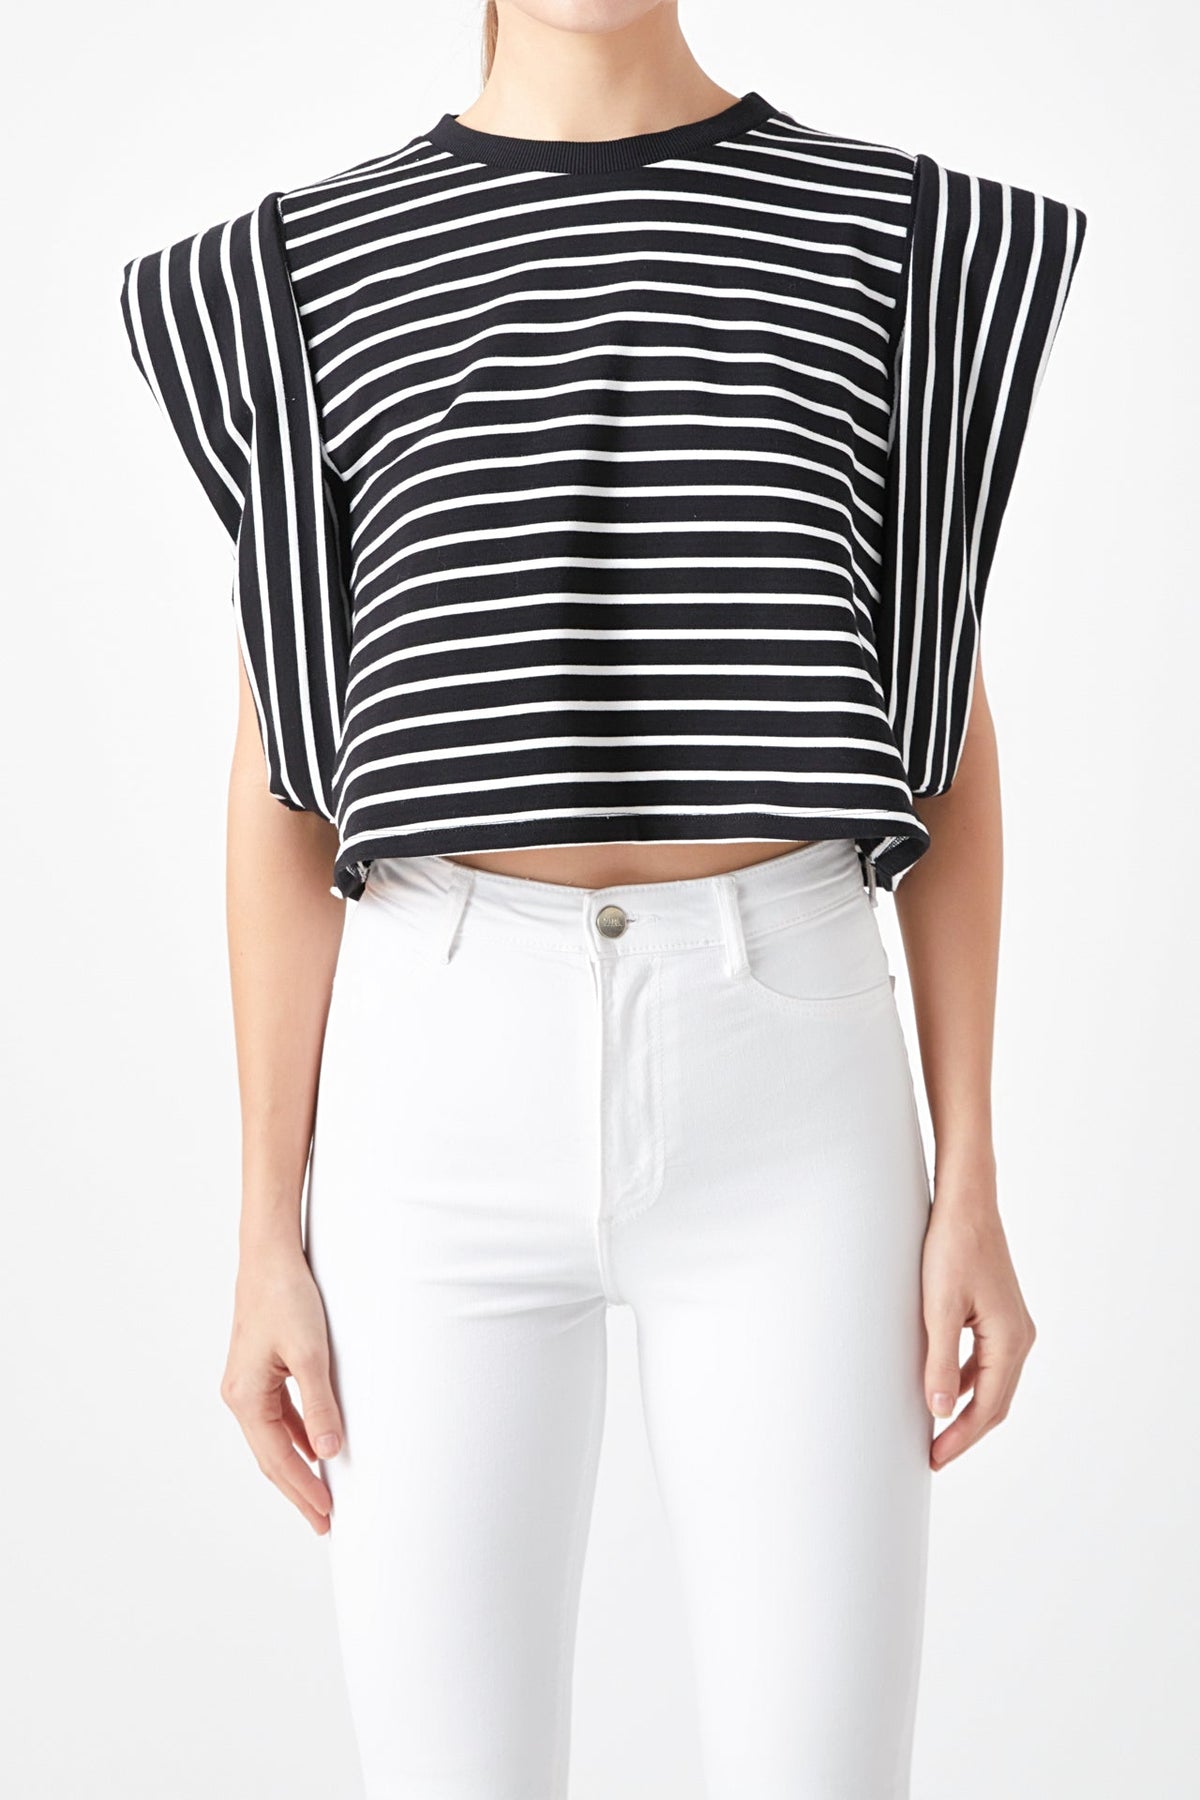 ENDLESS ROSE - Stripe Drop Shoulder Cropped Top - TOPS available at Objectrare